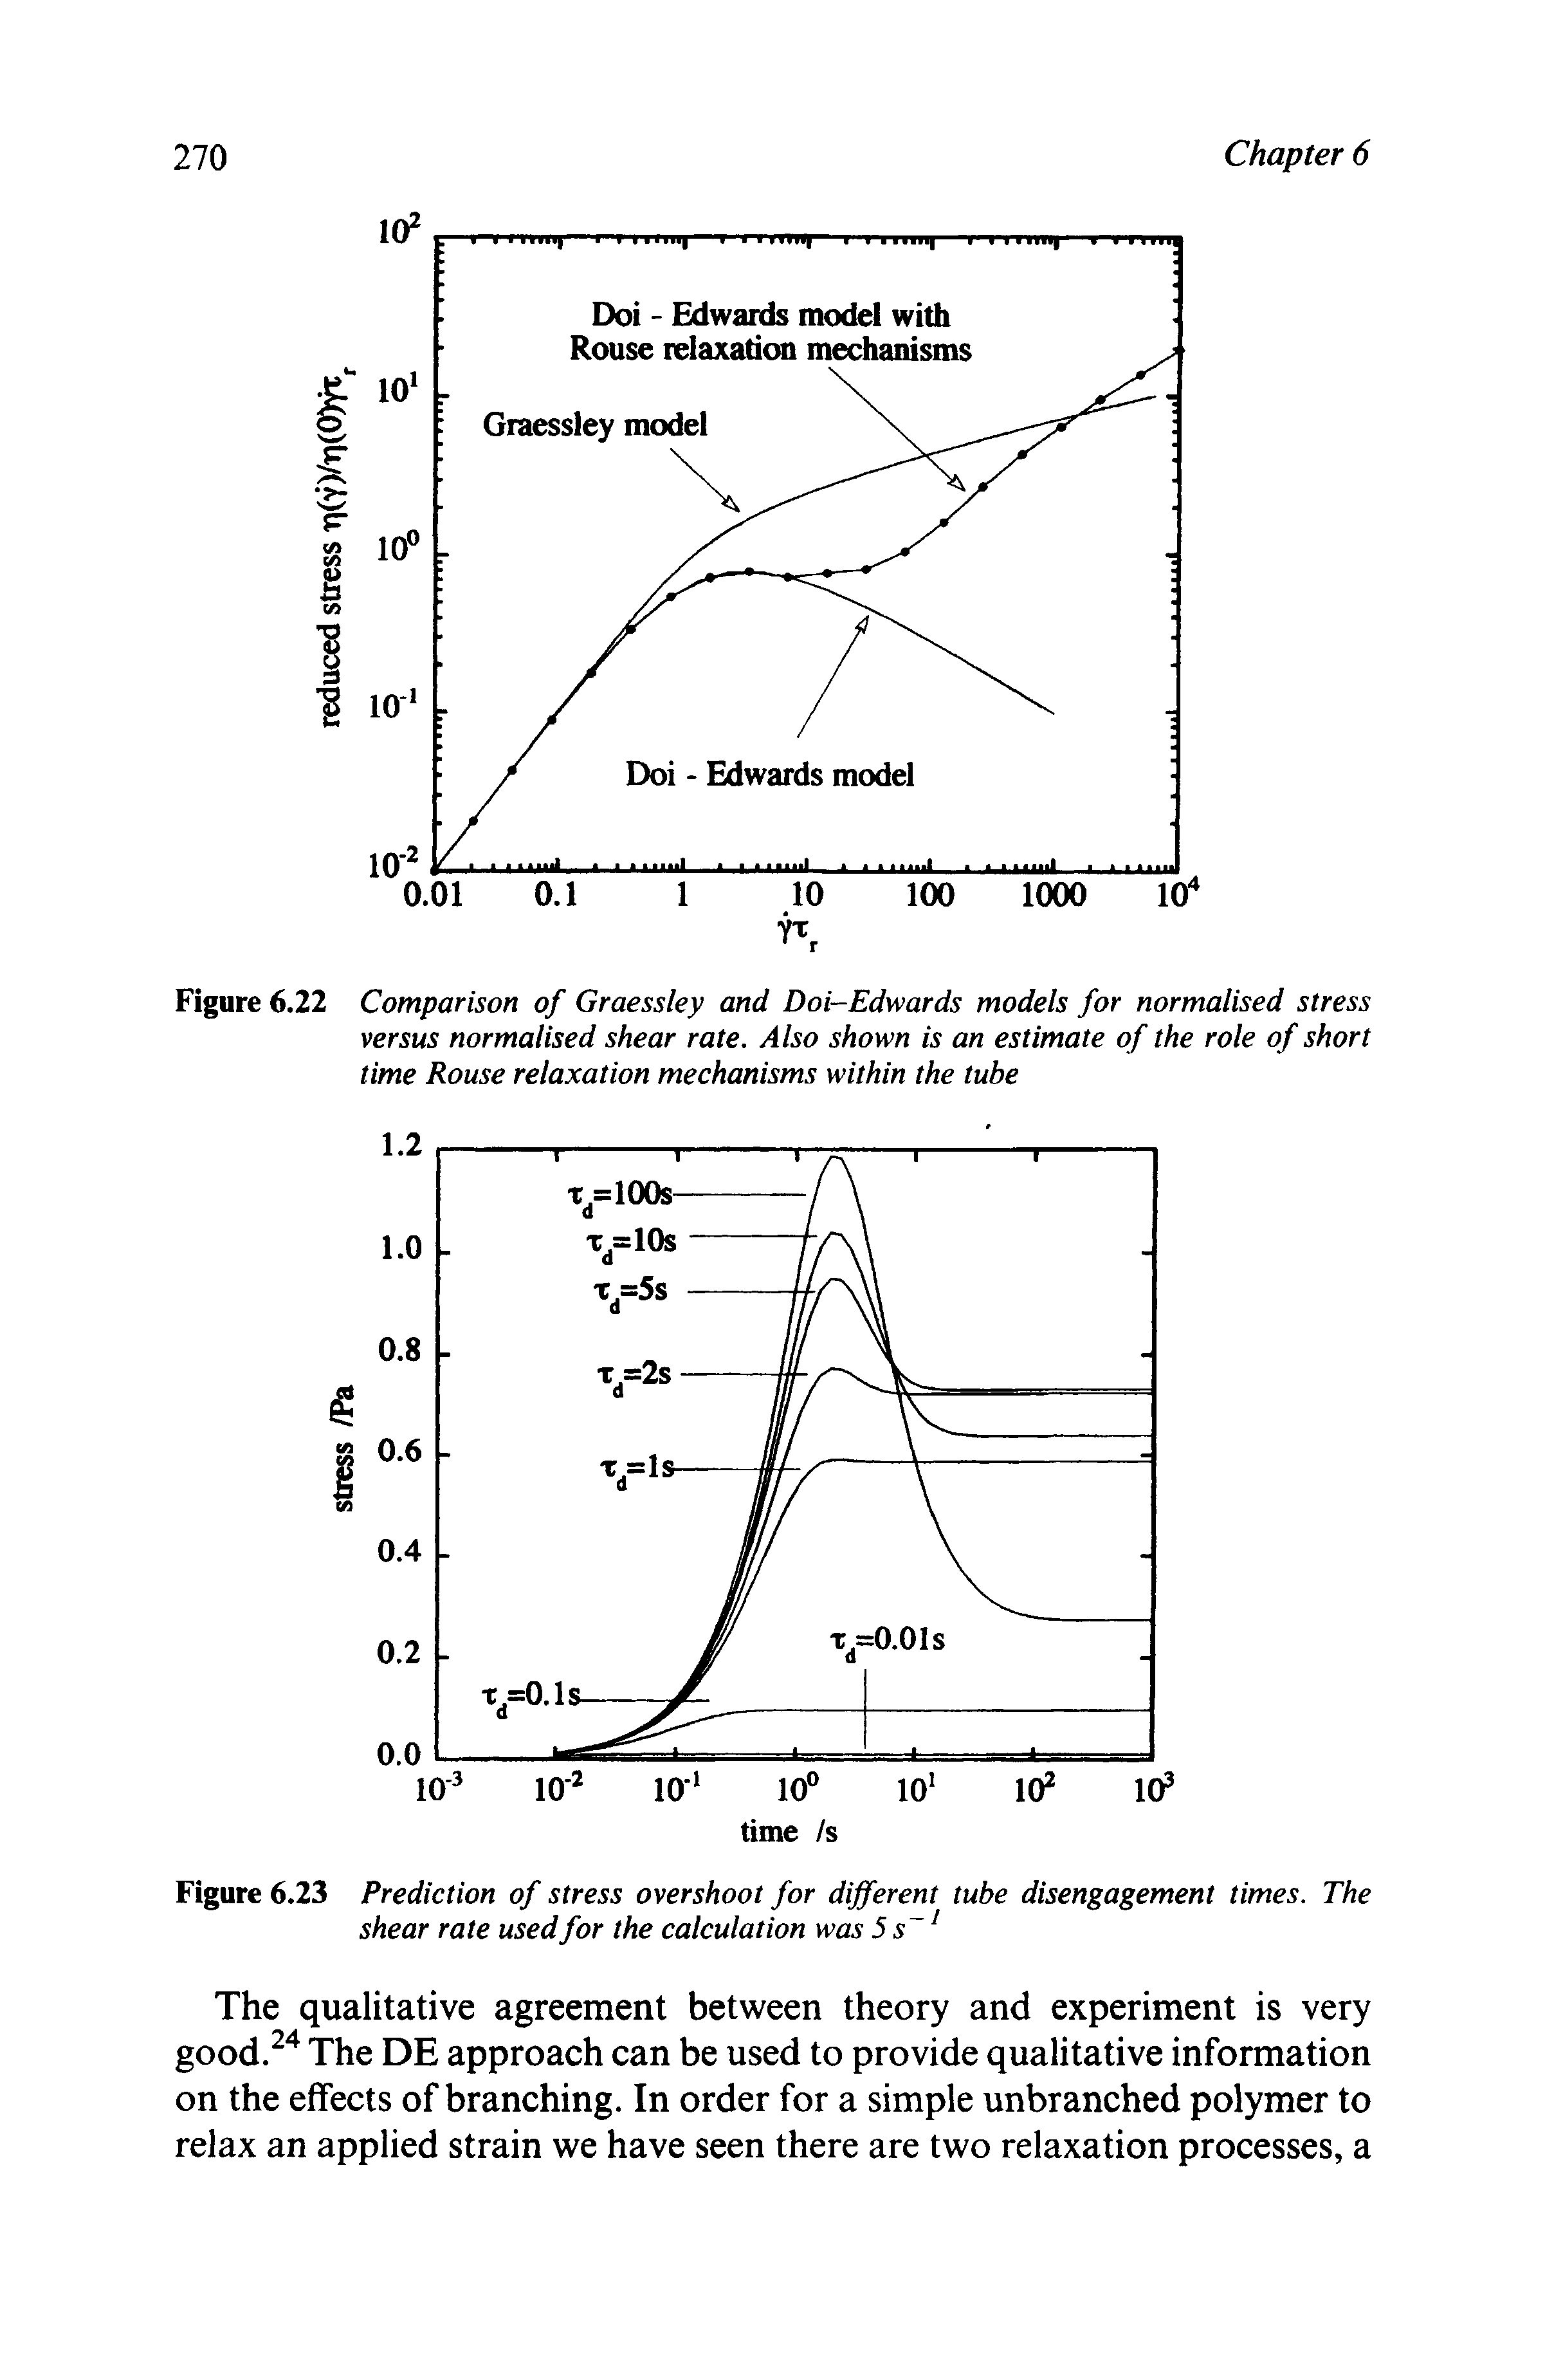 Figure 6.22 Comparison of Graessley and Doi-Edwards models for normalised stress versus normalised shear rate. Also shown is an estimate of the role of short time Rouse relaxation mechanisms within the tube...